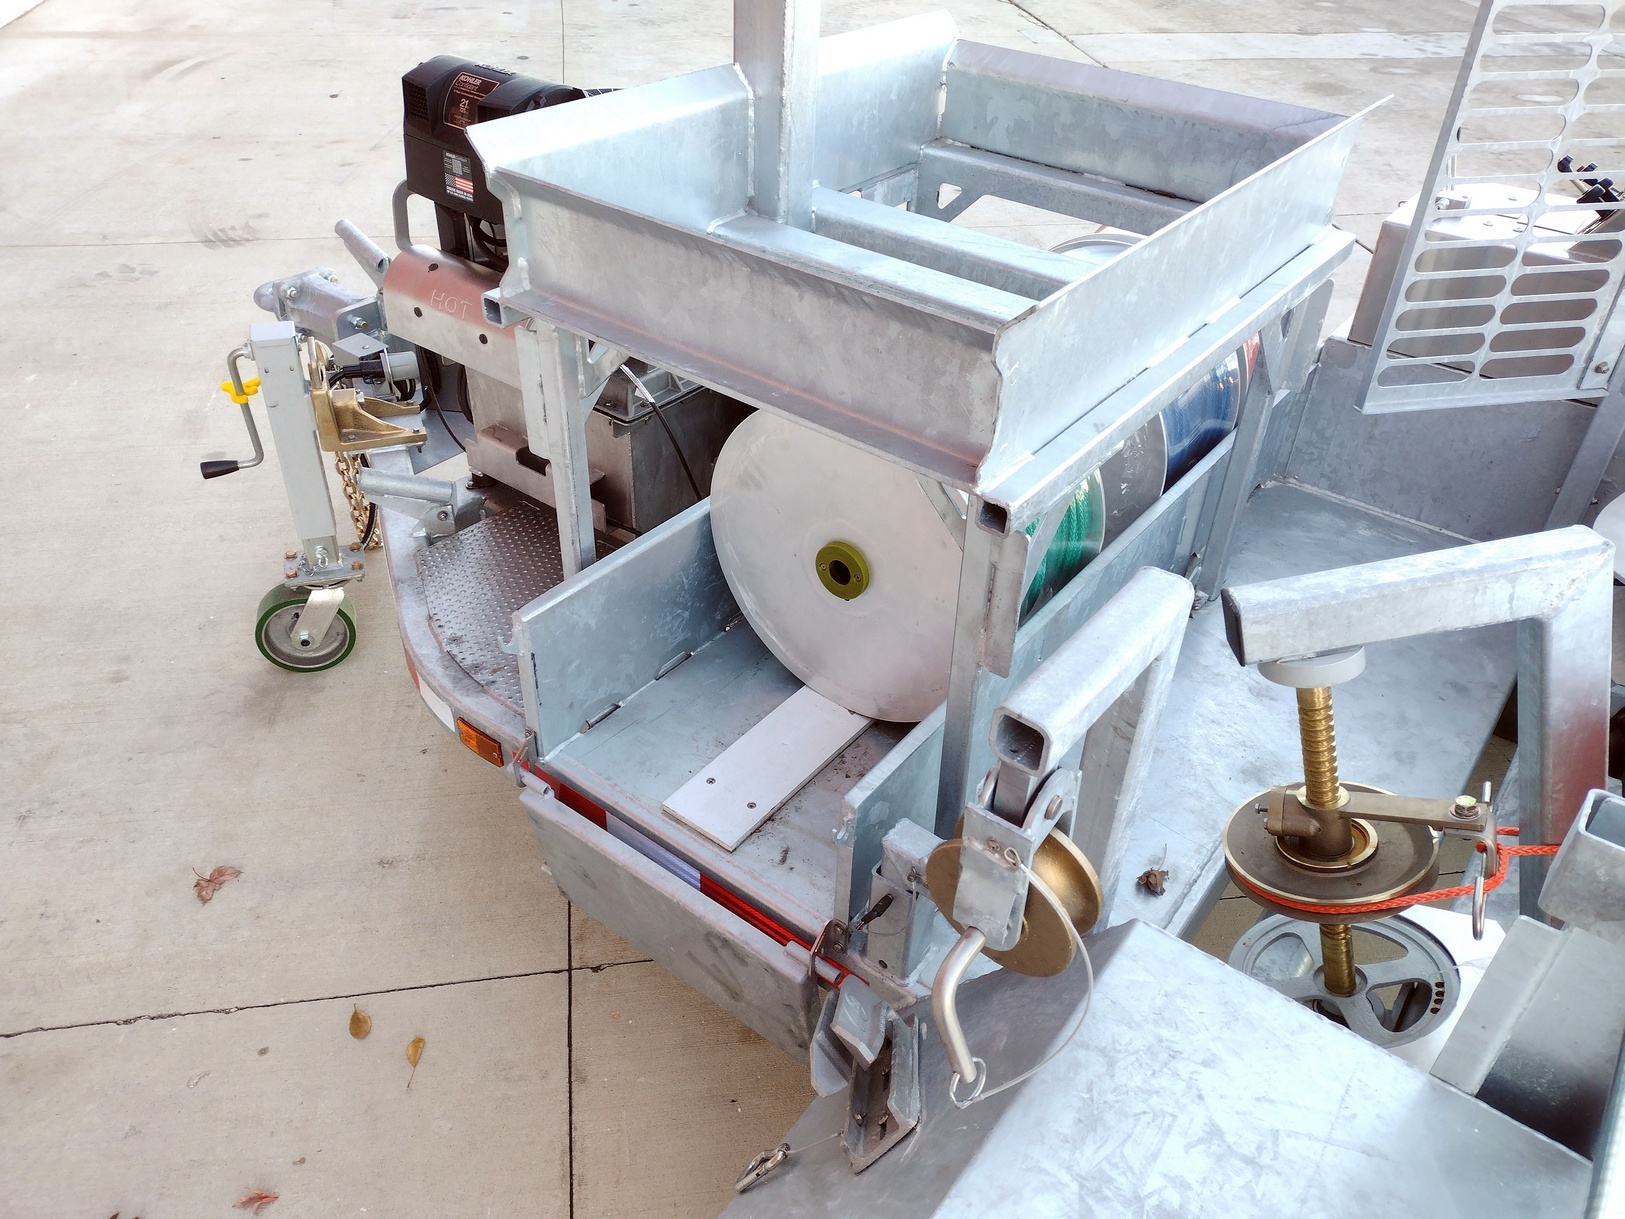 Tight Left side view of the rope storage area below the payout bracket stand of a 1570-B Puller. The trailer is shown on a concrete pad. Also visible are parts of the pulling table, jack, power source and solar battery box.